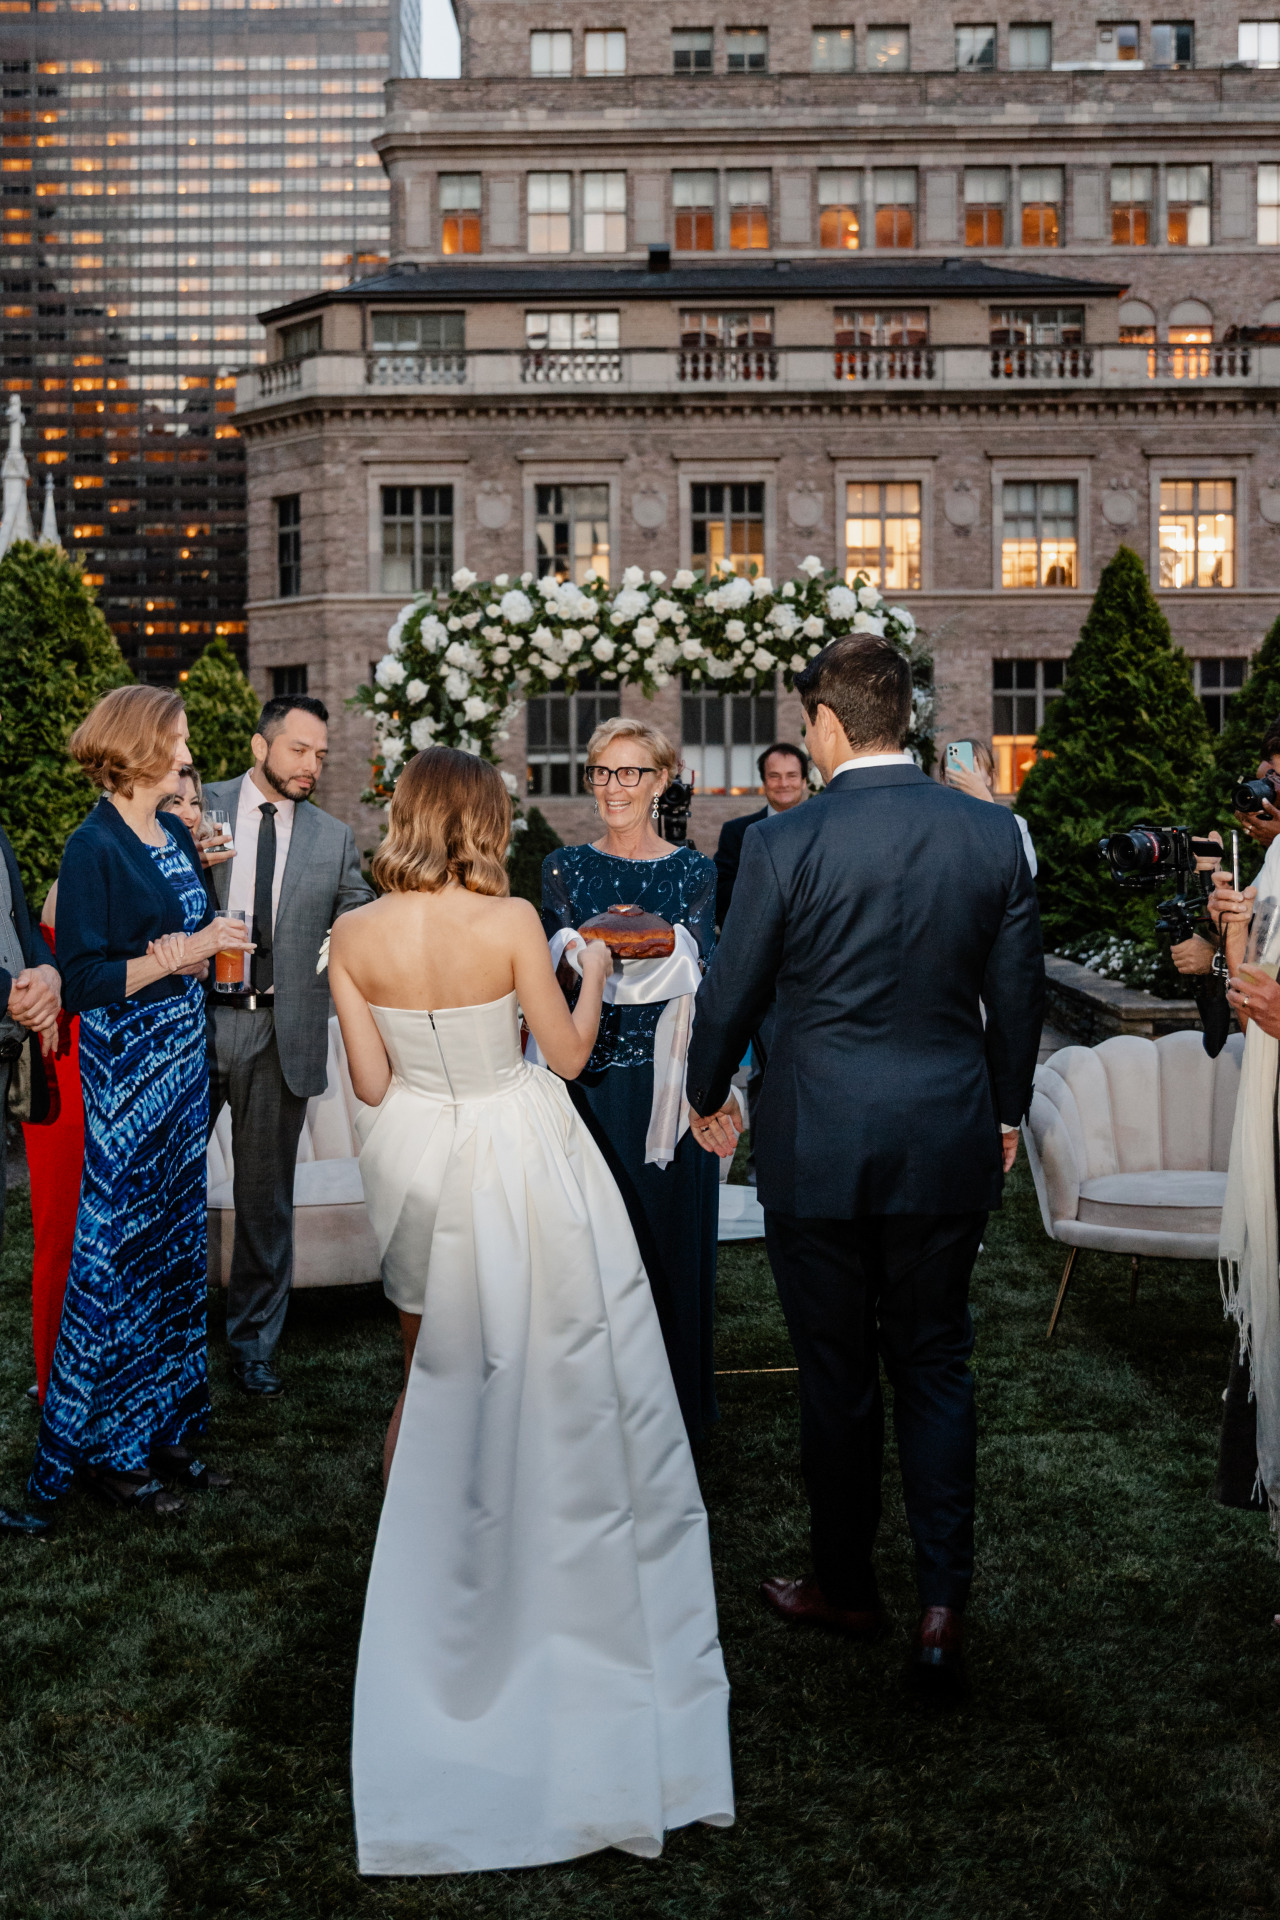 7 Wedding reception in NYC event photographer 2